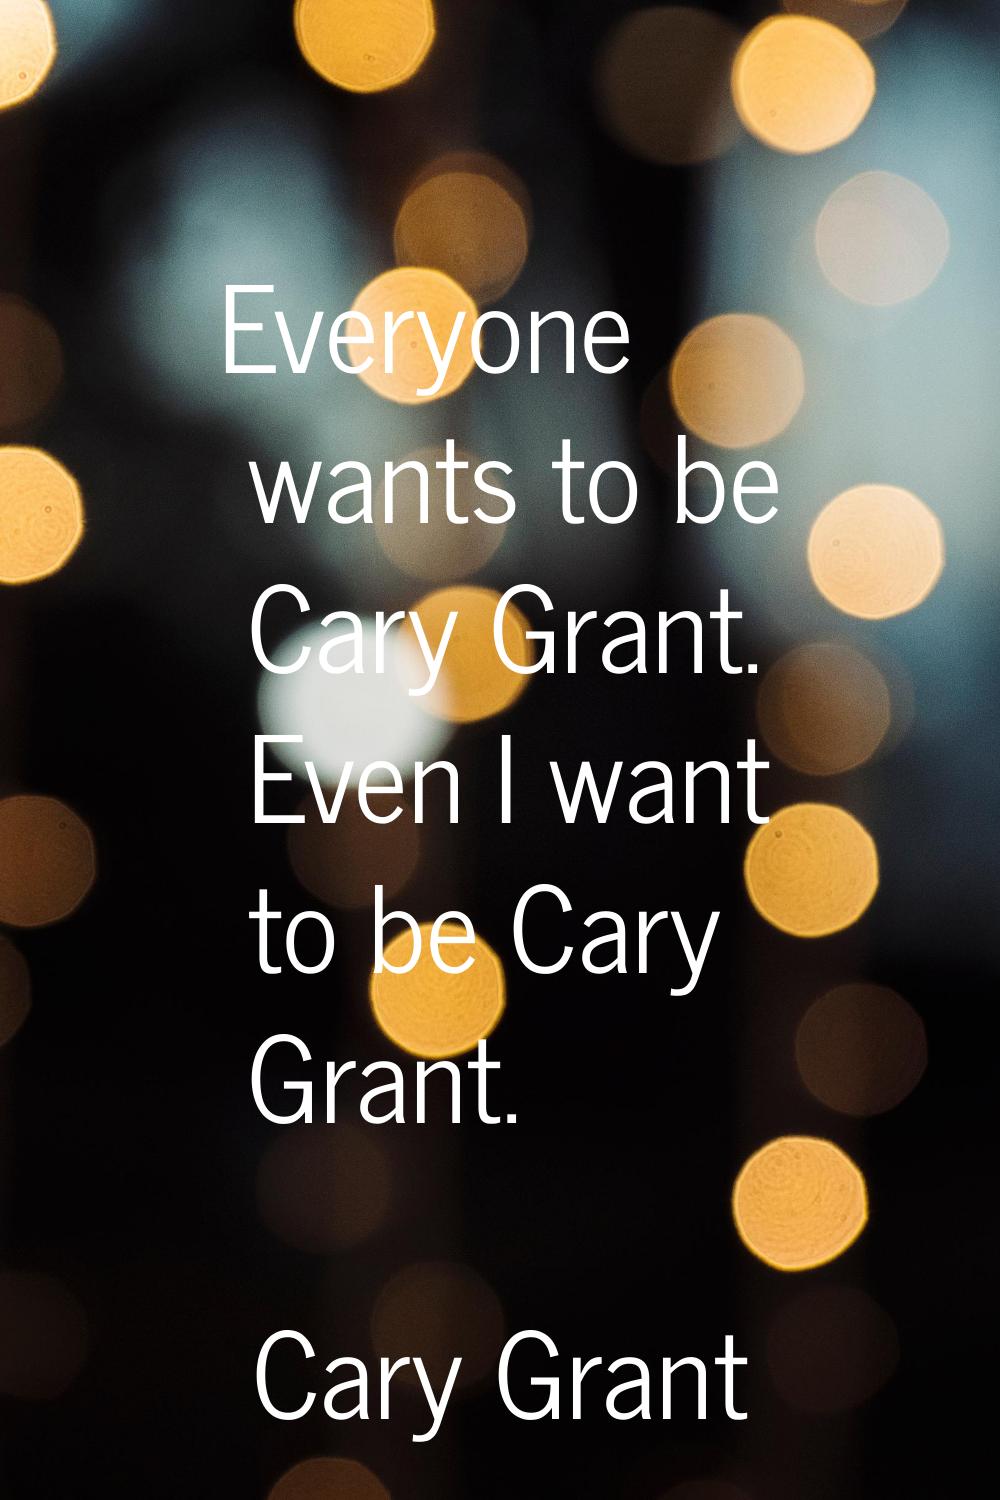 Everyone wants to be Cary Grant. Even I want to be Cary Grant.